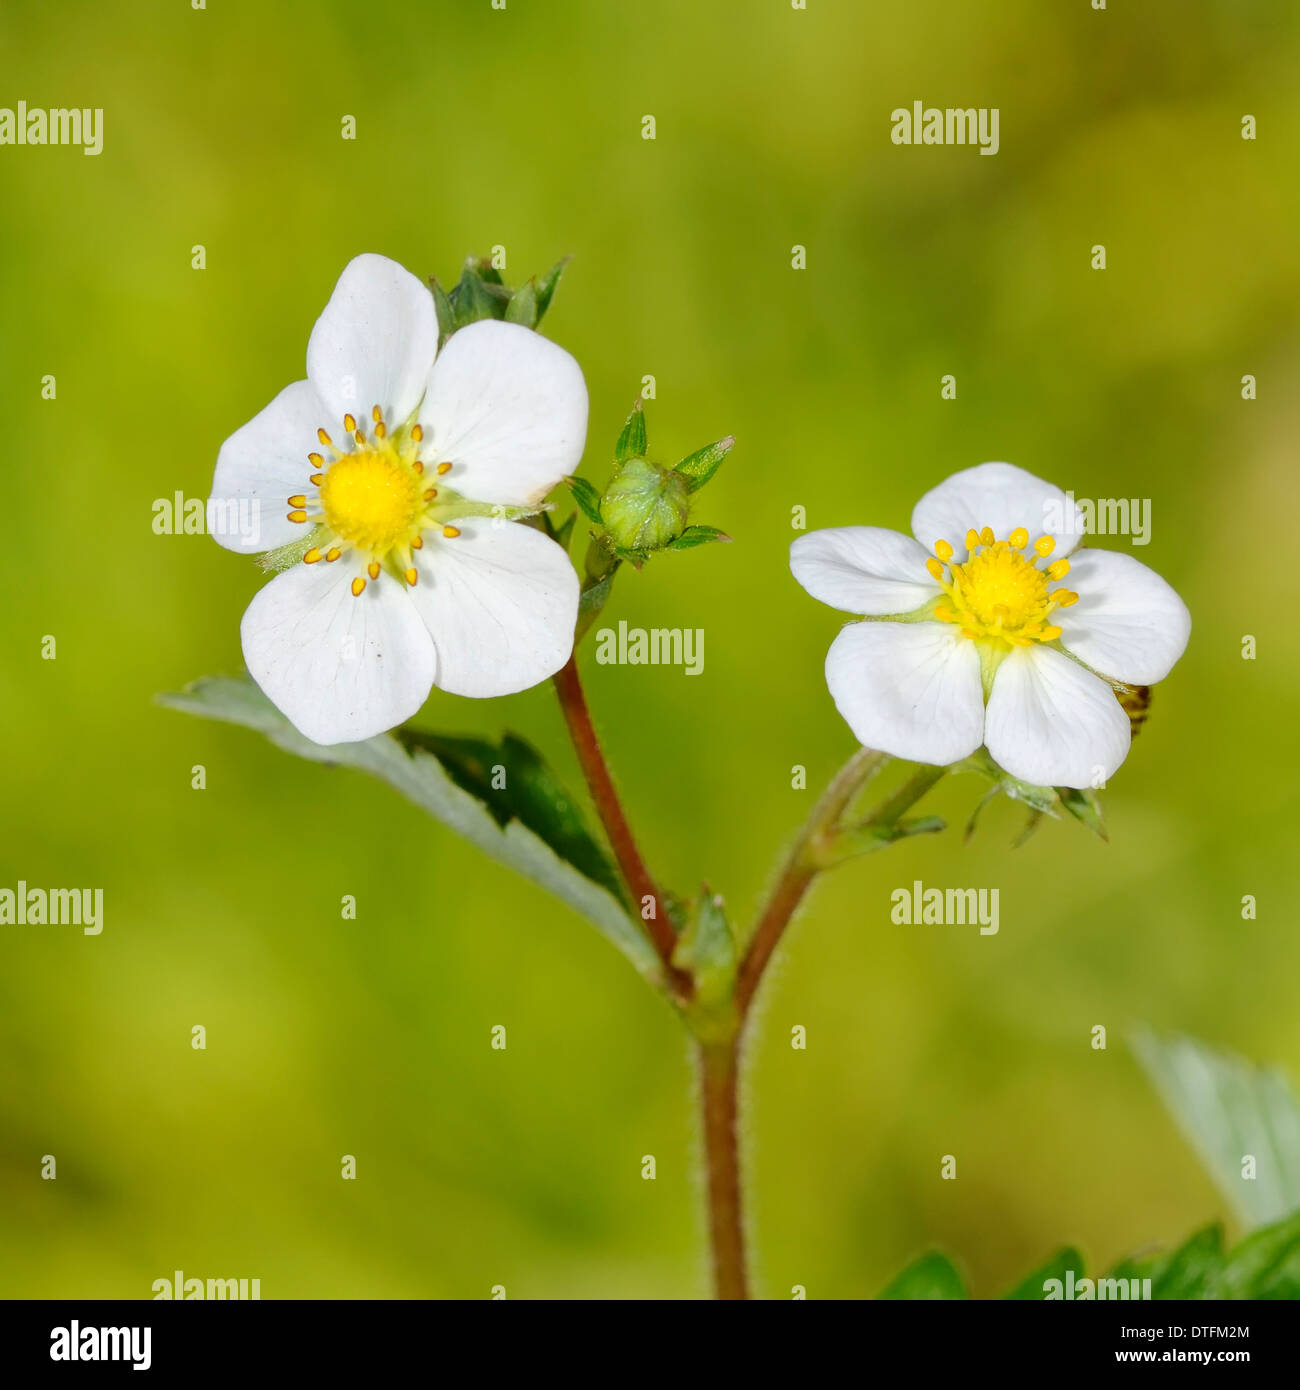 Wild strawberry, Fragaria vesca, portrait of two flowers with out of focus background. Stock Photo